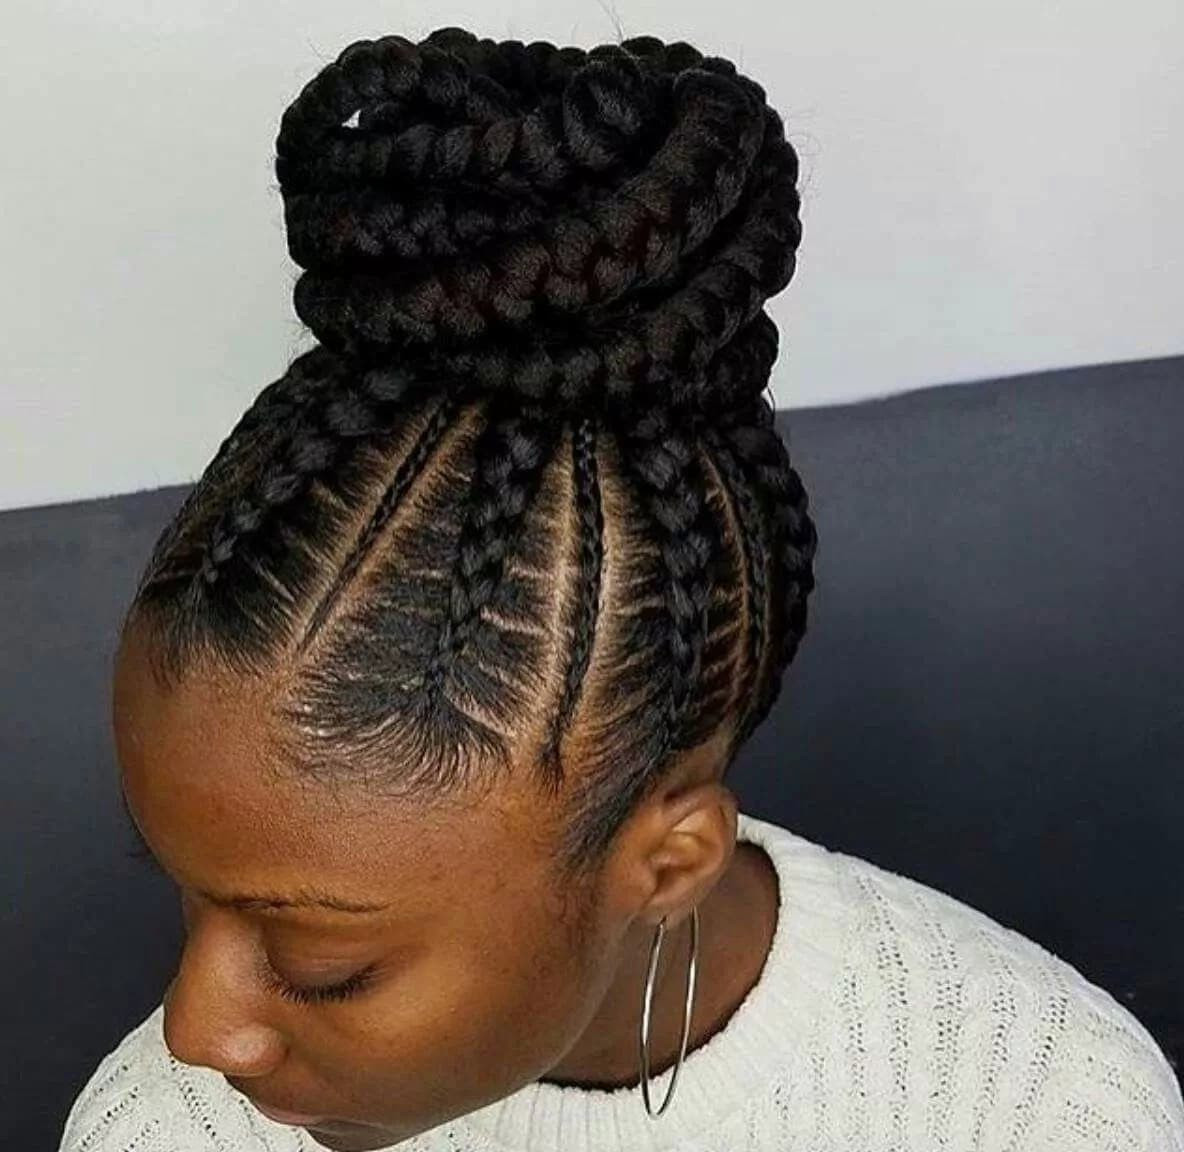 Nigerian Braids Hairstyles
 Top 10 African braiding hairstyles for la s PHOTOS